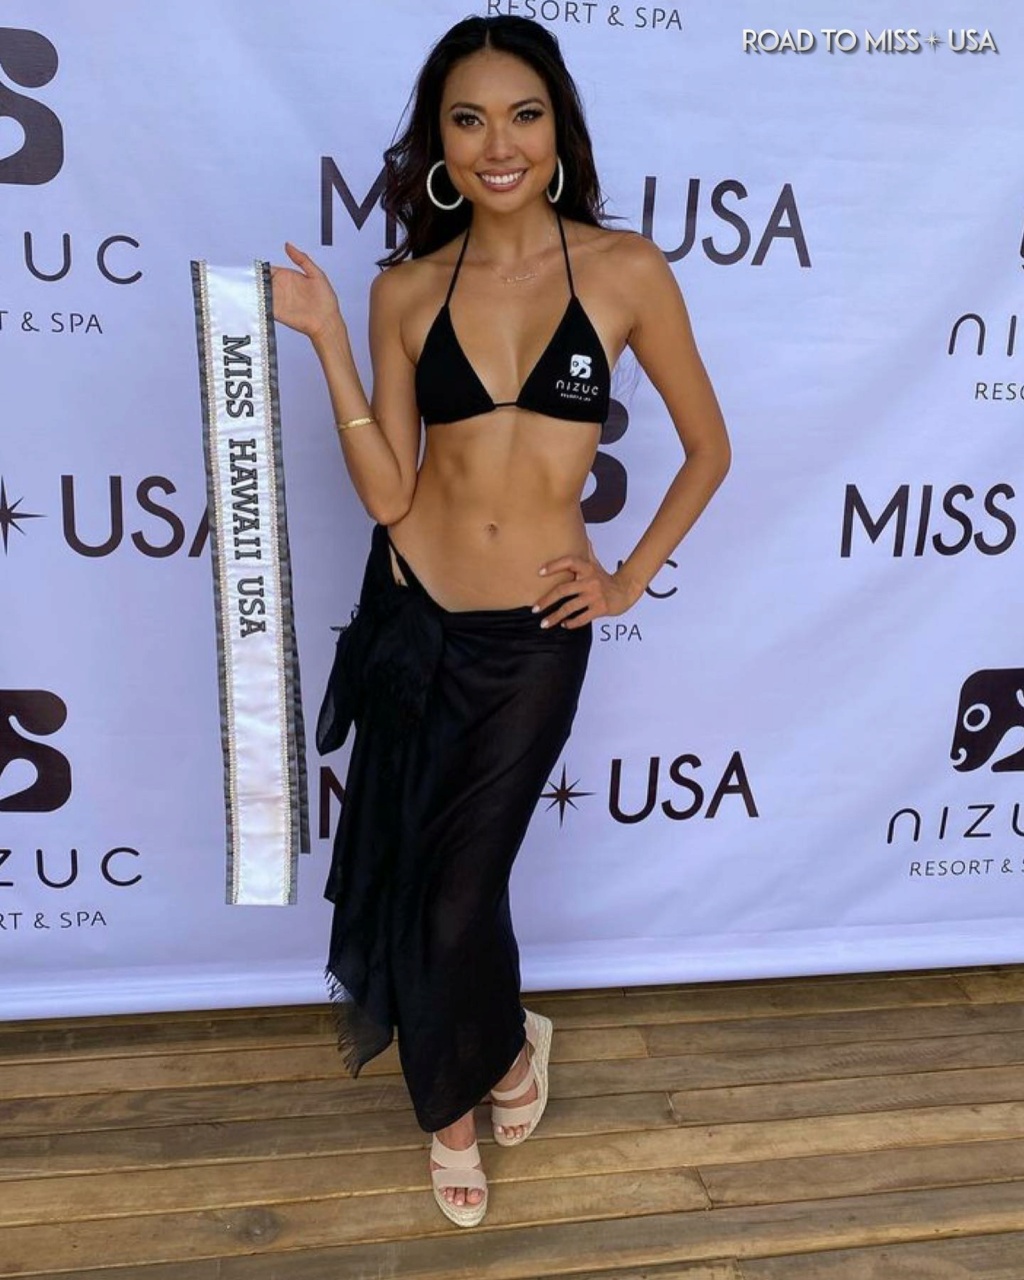 ROAD TO MISS USA 2021 is KENTUCKY! - Page 3 24193810